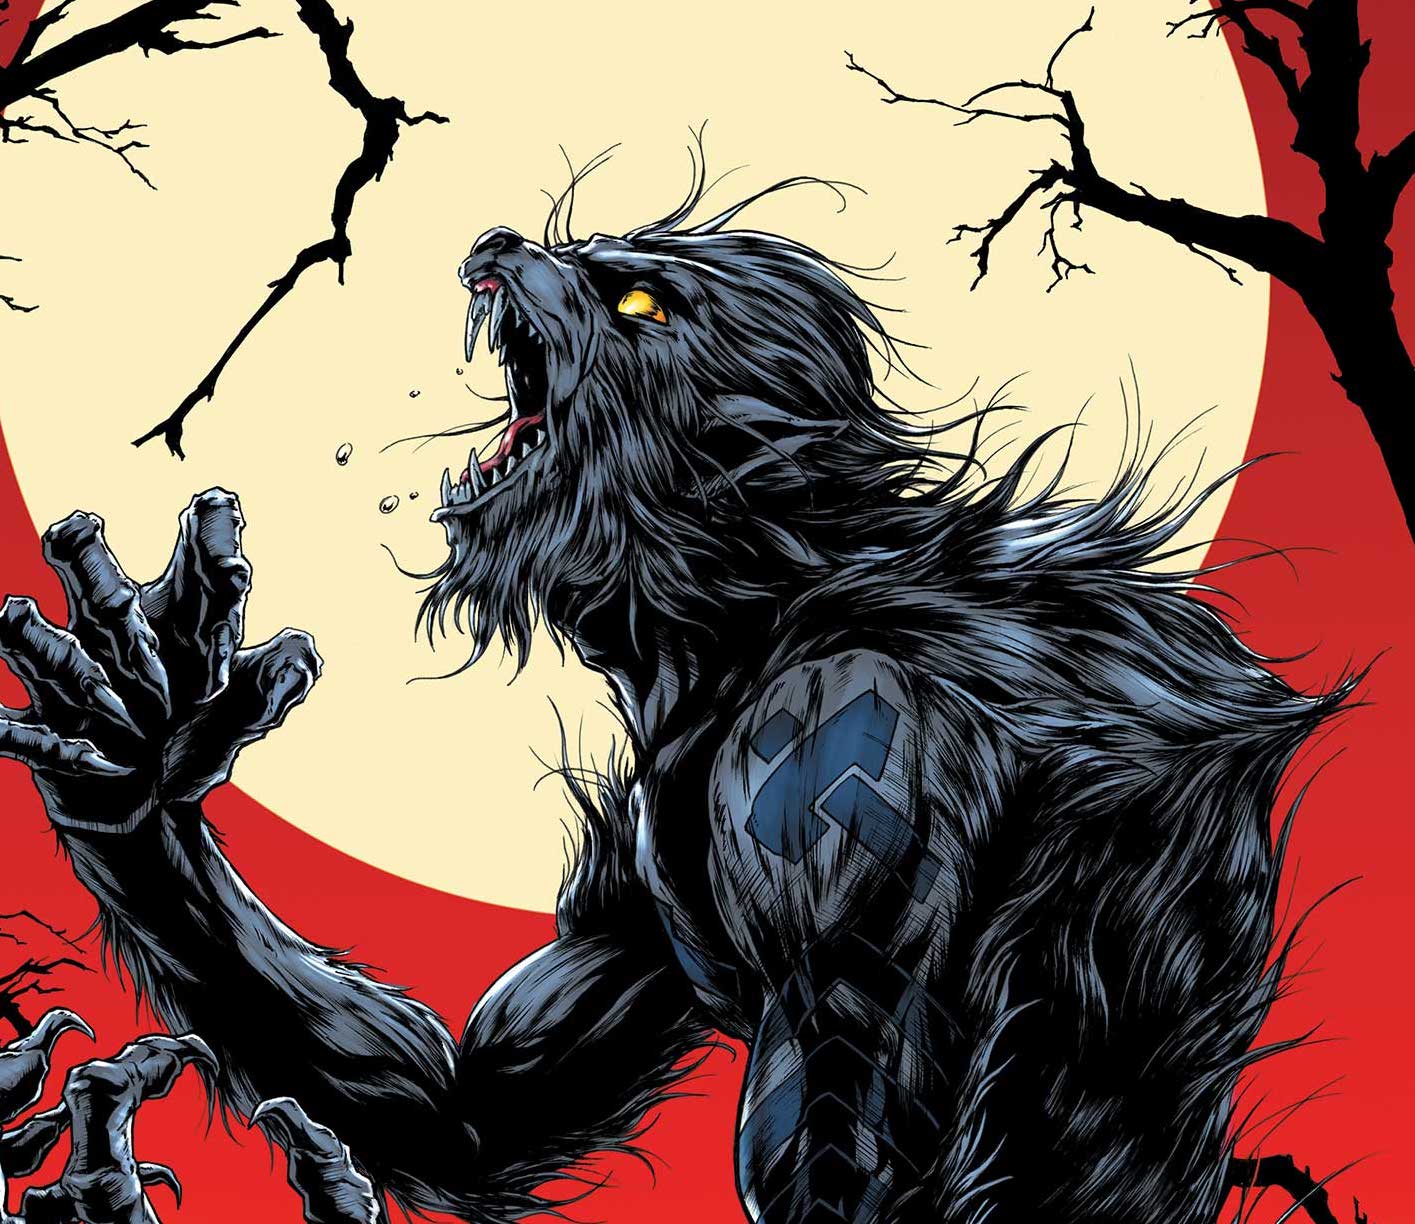 Afro Samurai creator Takashi Okazaki delivers a howling good 'Werewolf by Night' variant cover